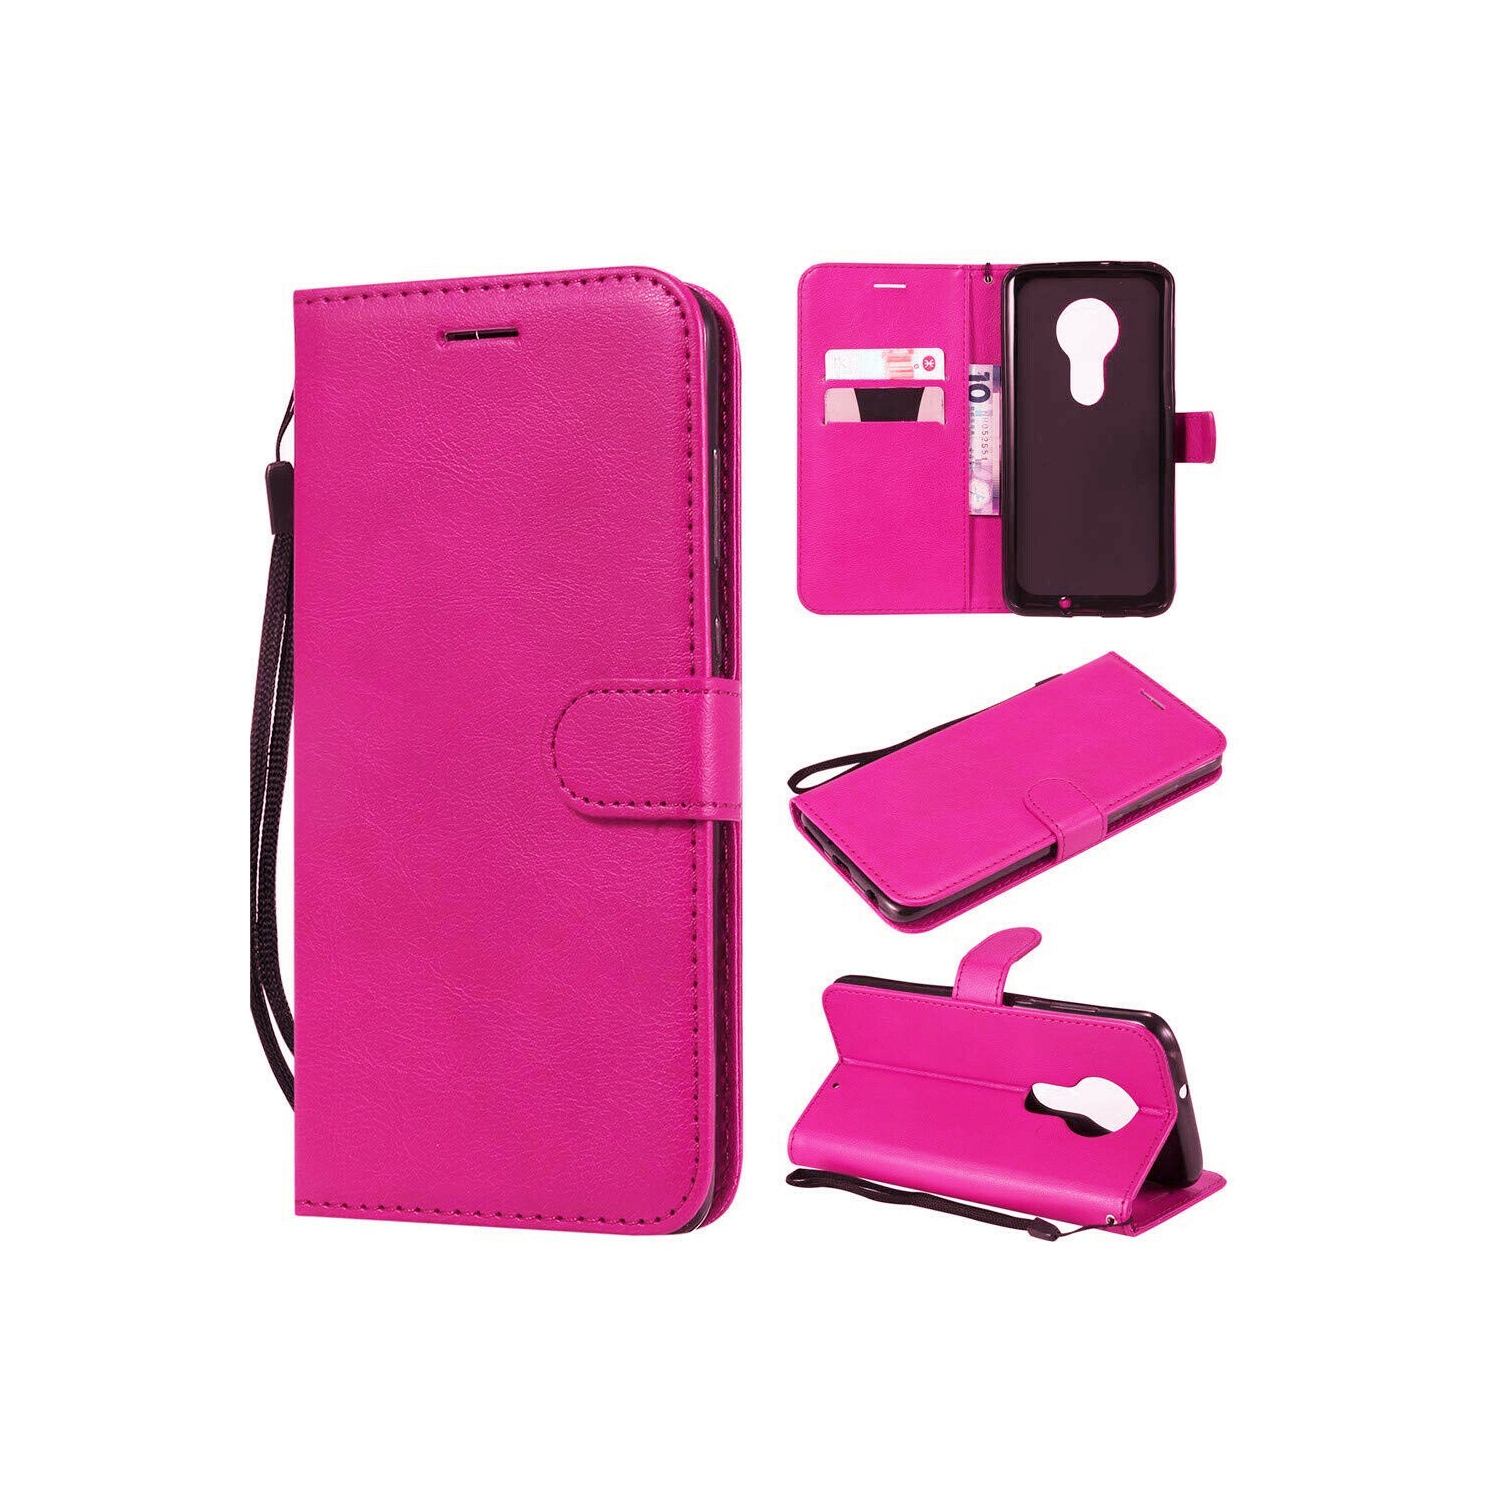 [CS] Motorola Moto G7 Power Case, Magnetic Leather Folio Wallet Flip Case Cover with Card Slot, Hot Pink